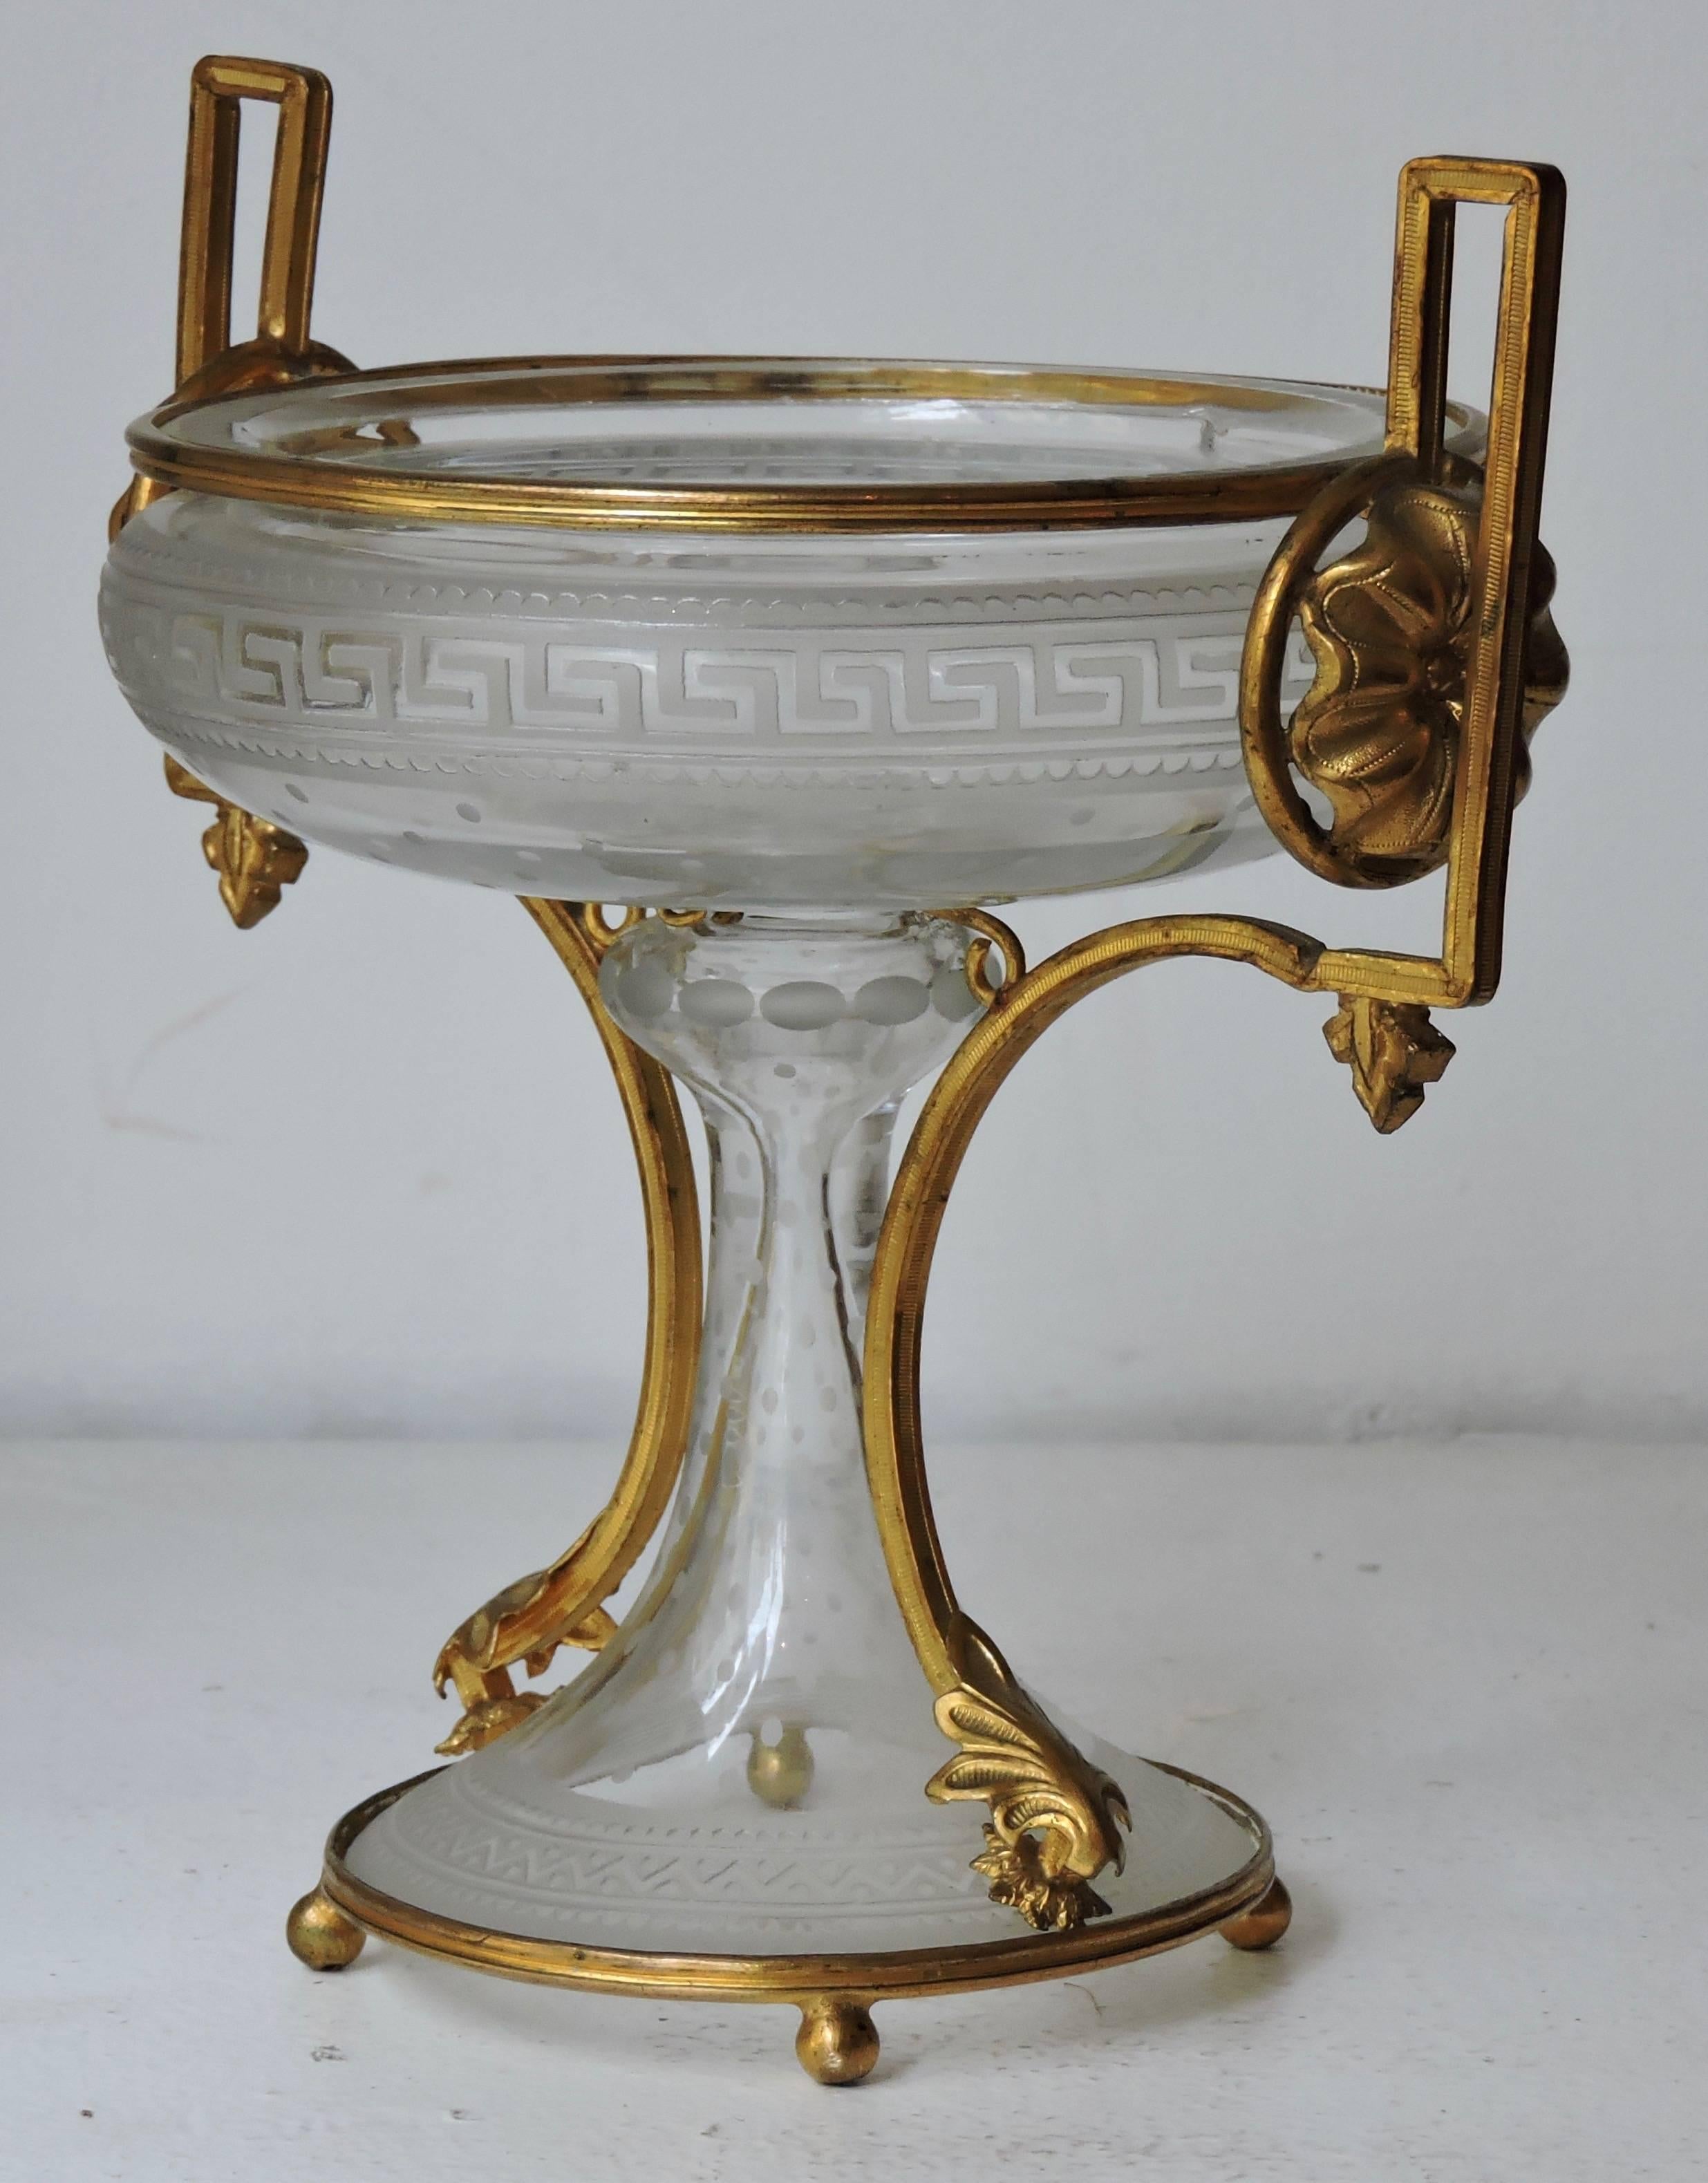 An very fine neoclassical engraved and ormolu-mounted crystal cup
Designed with a Greek frieze
circa 1870.